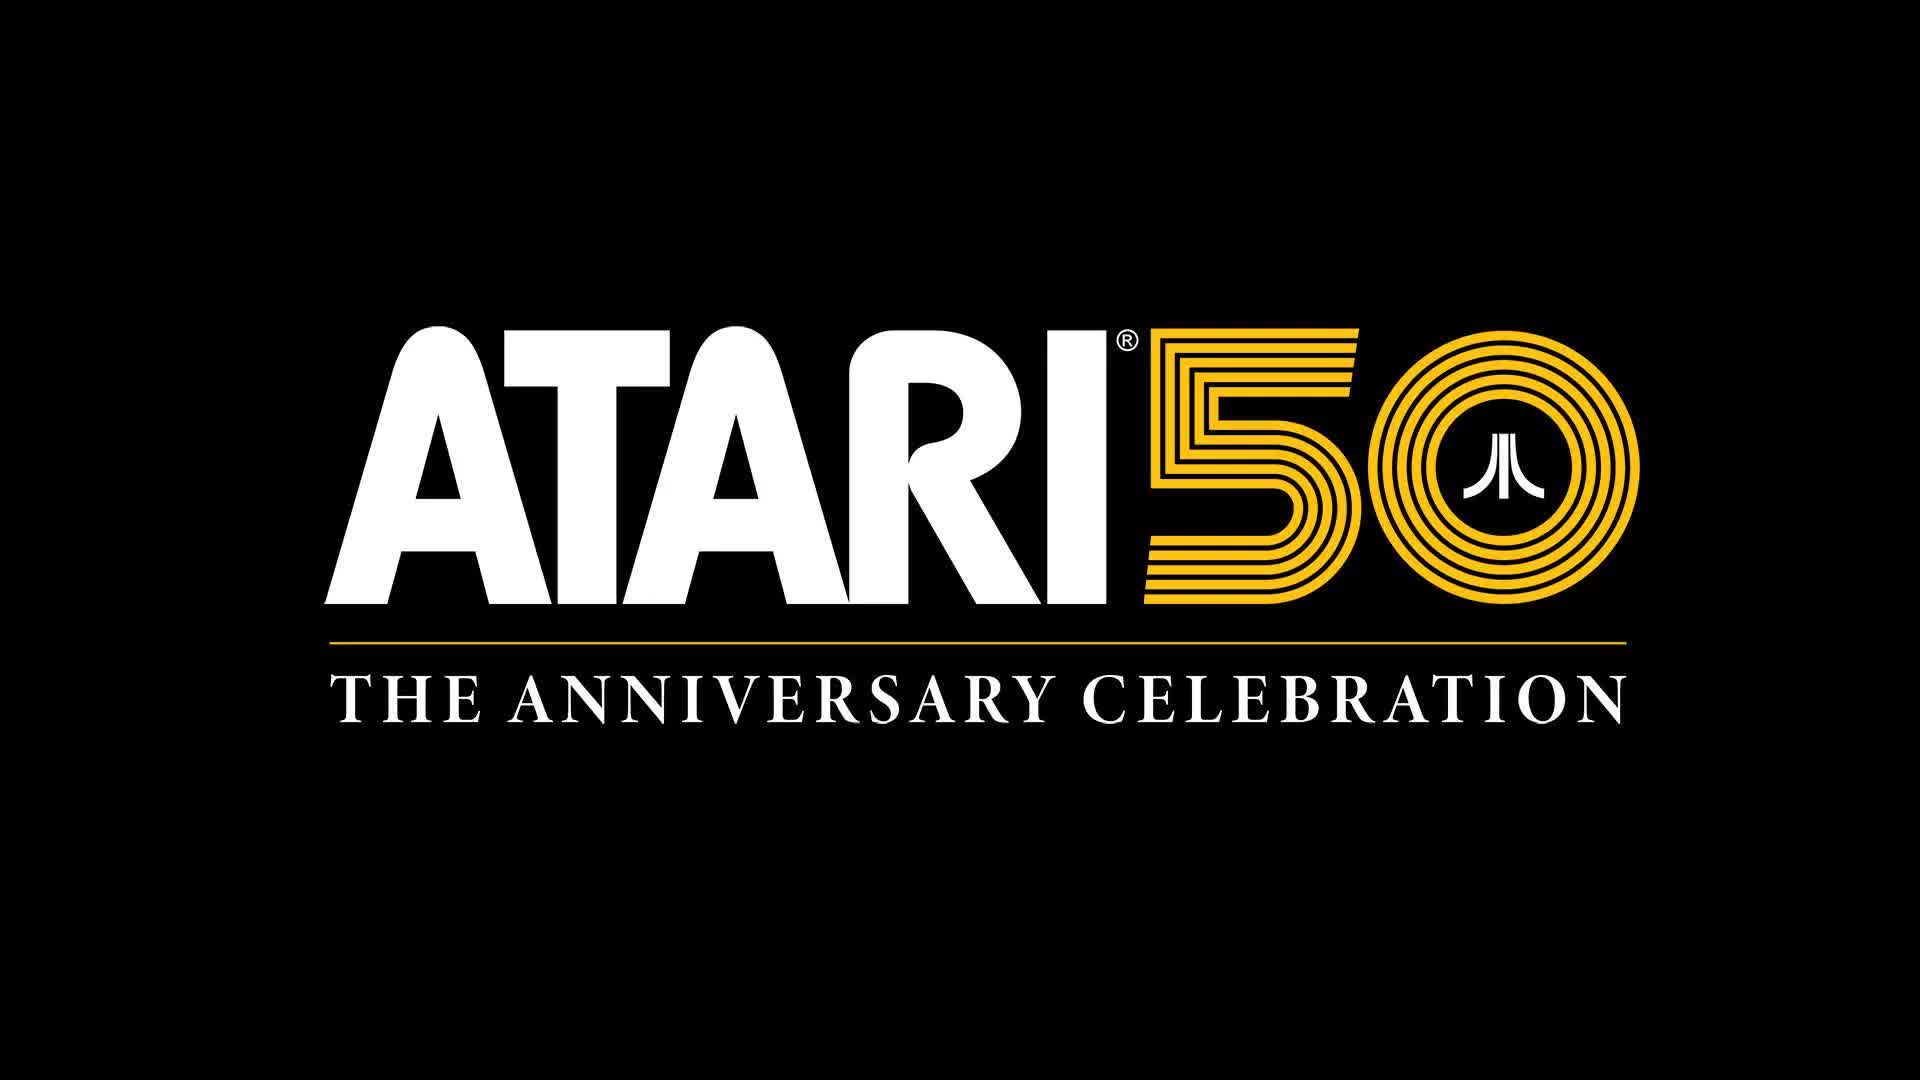 Atari's 50th anniversary celebration gives players a hands-on lesson in video gaming history